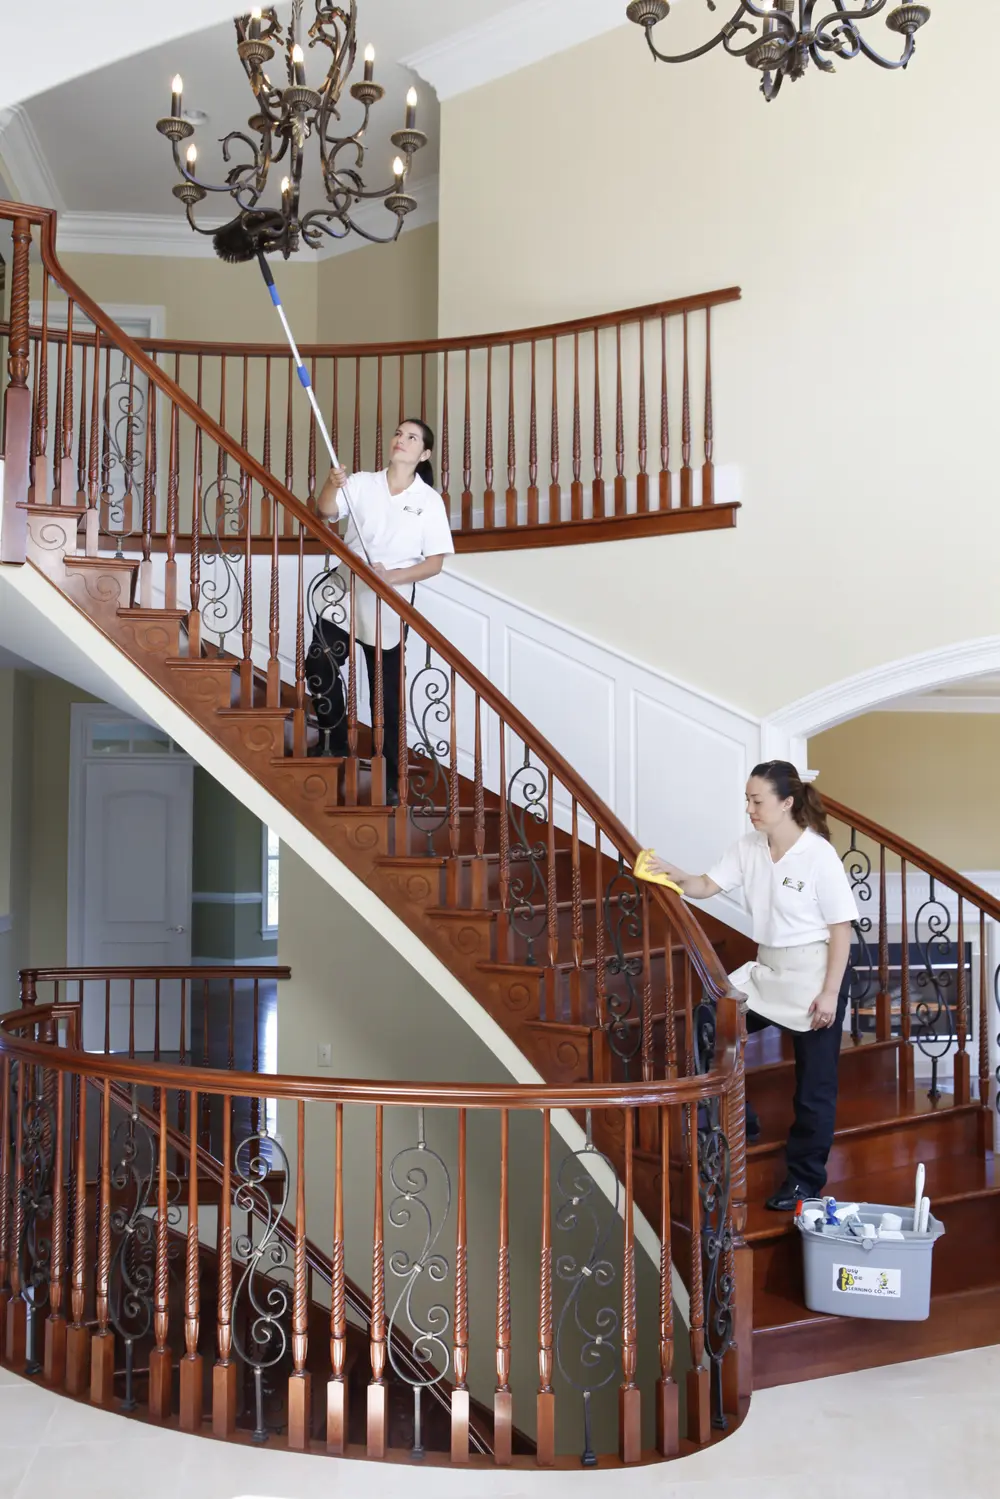 Busy Bee Cleaning Company house cleaners, house cleaning services in exton pa, house cleaner in exton pa, deep clean in exton pa, bi weekly home cleaning in exton pa and west chester 